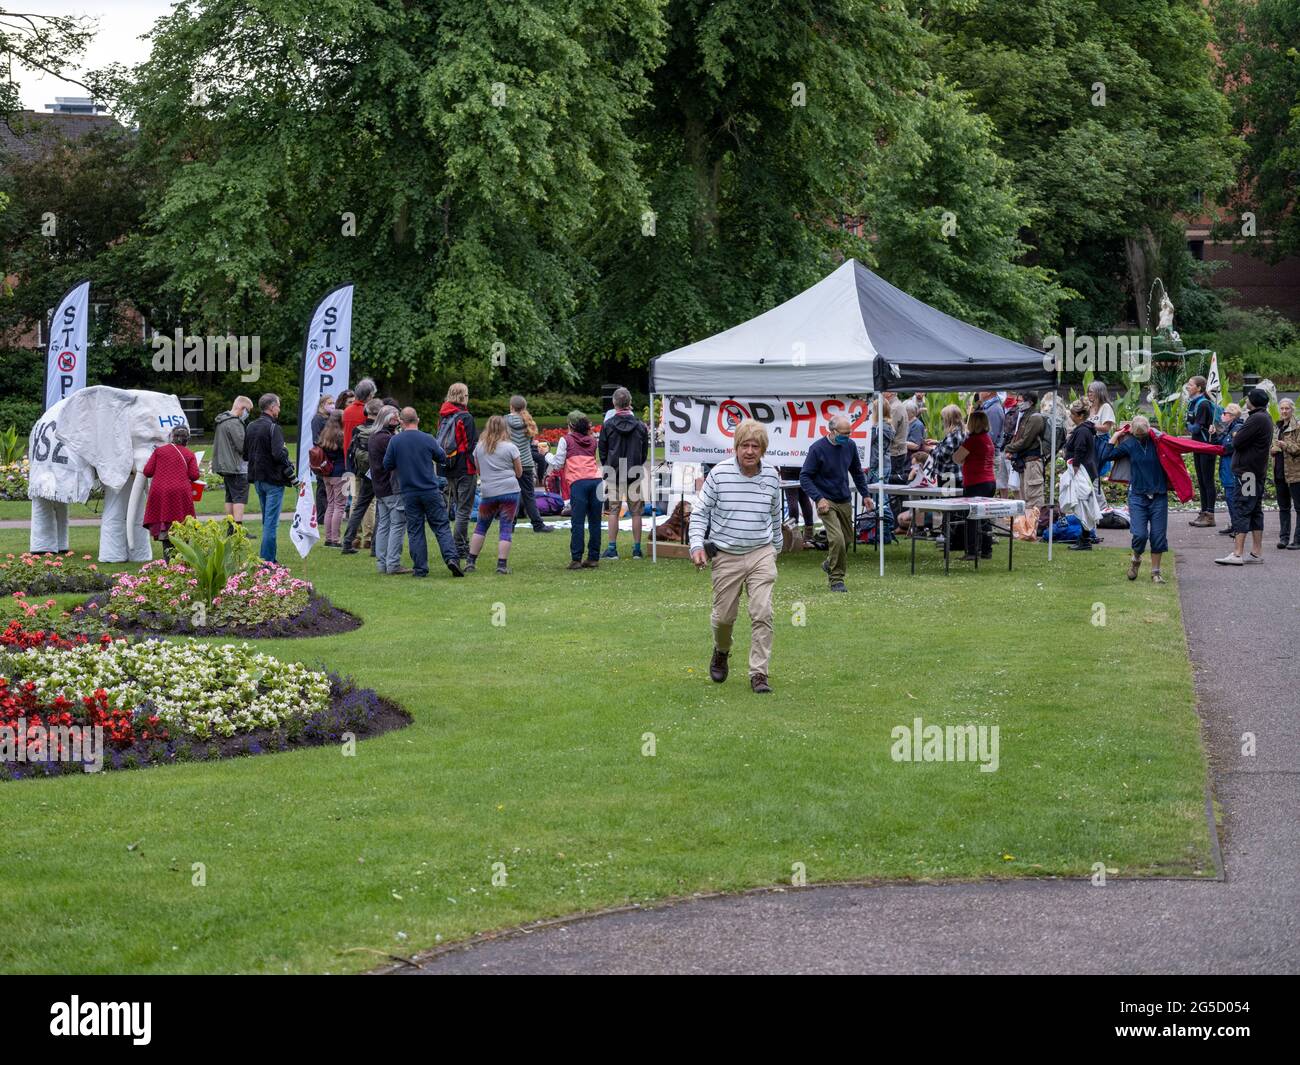 LICHFIELD. UK.  26th JUNE 2021.  HS2 Rebellion Stop HS2 rally in Beacon Park, Lichfield, marks the beginning of an 8 day walk to Wigan to raise awareness of the Stop HS2 campaign. A crowd of around 60 gathers in support.  Credit: Richard Grange / Alamy Live News Stock Photo